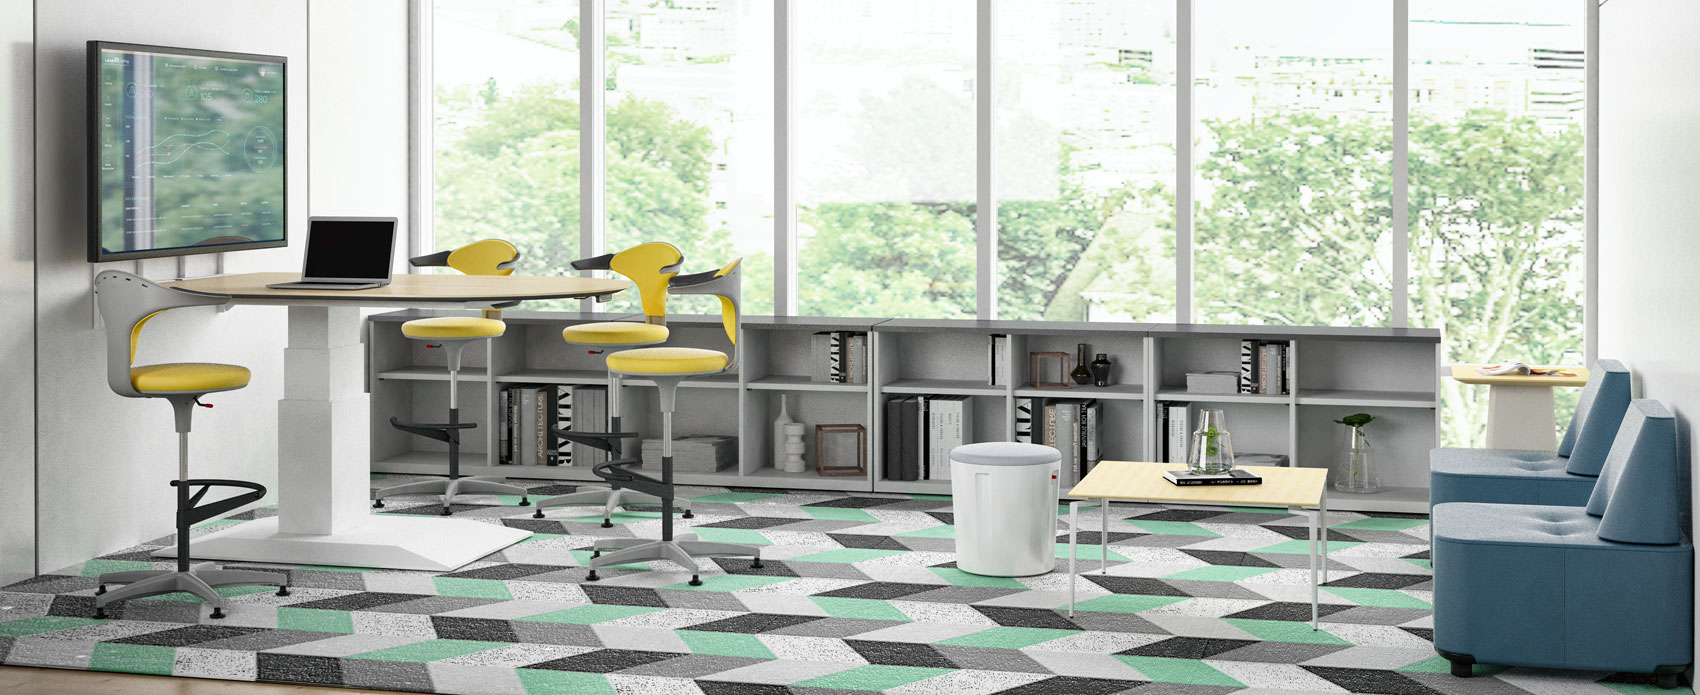 Lift v2 height adjustable table with yellow ginko stools and modu sofa set at the opposite end.